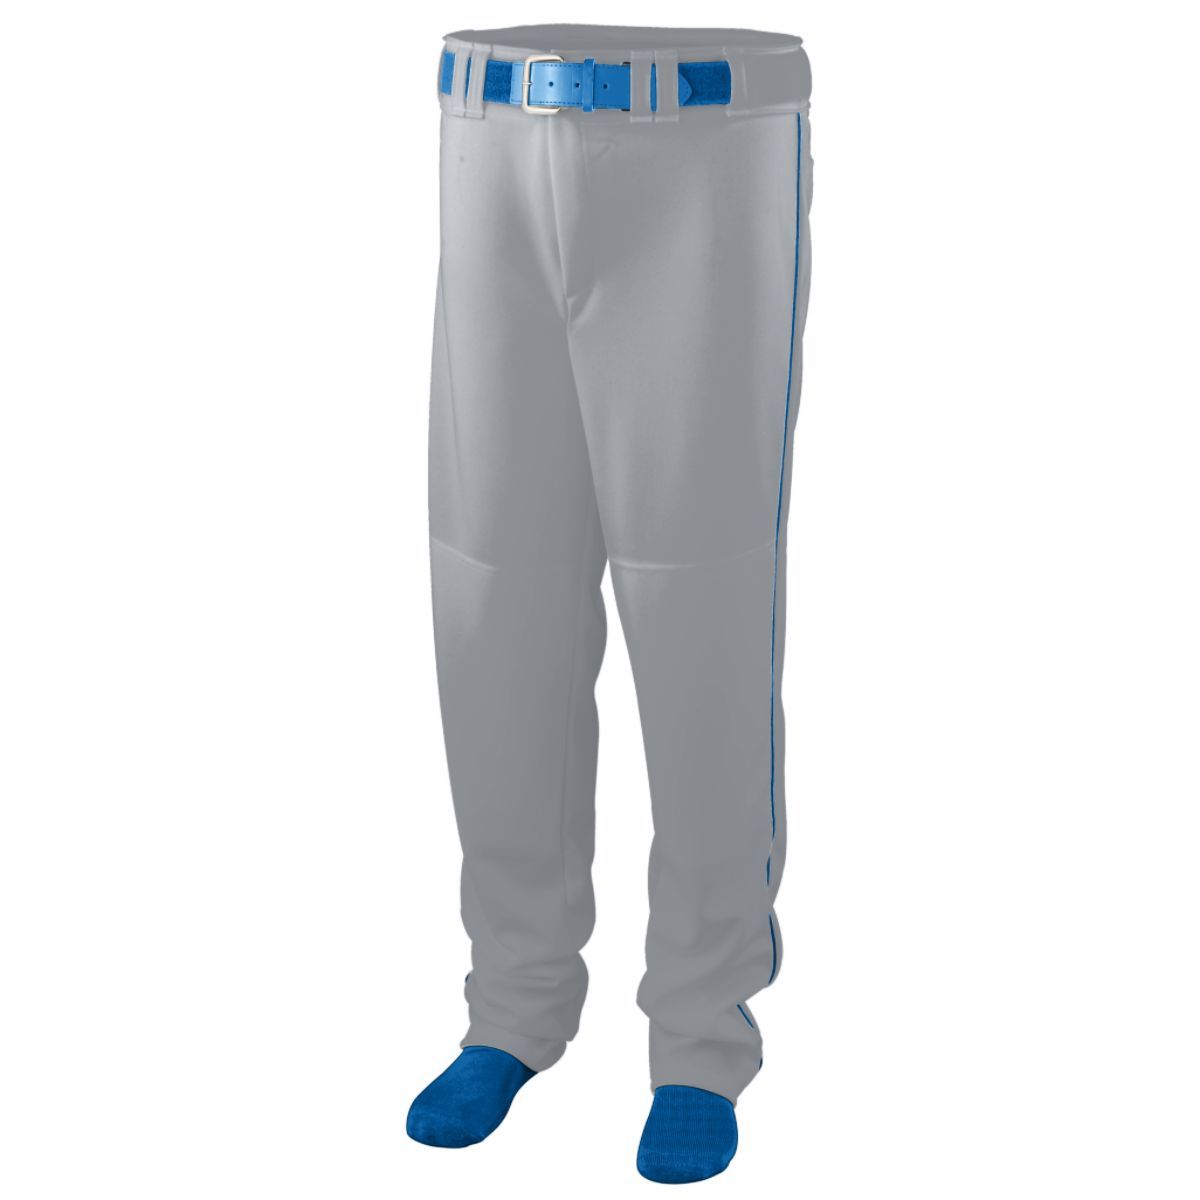 Augusta Sportswear Series Baseball/Softball Pant With Piping in Silver Grey/Royal  -Part of the Adult, Adult-Pants, Pants, Augusta-Products, Baseball, All-Sports, All-Sports-1 product lines at KanaleyCreations.com